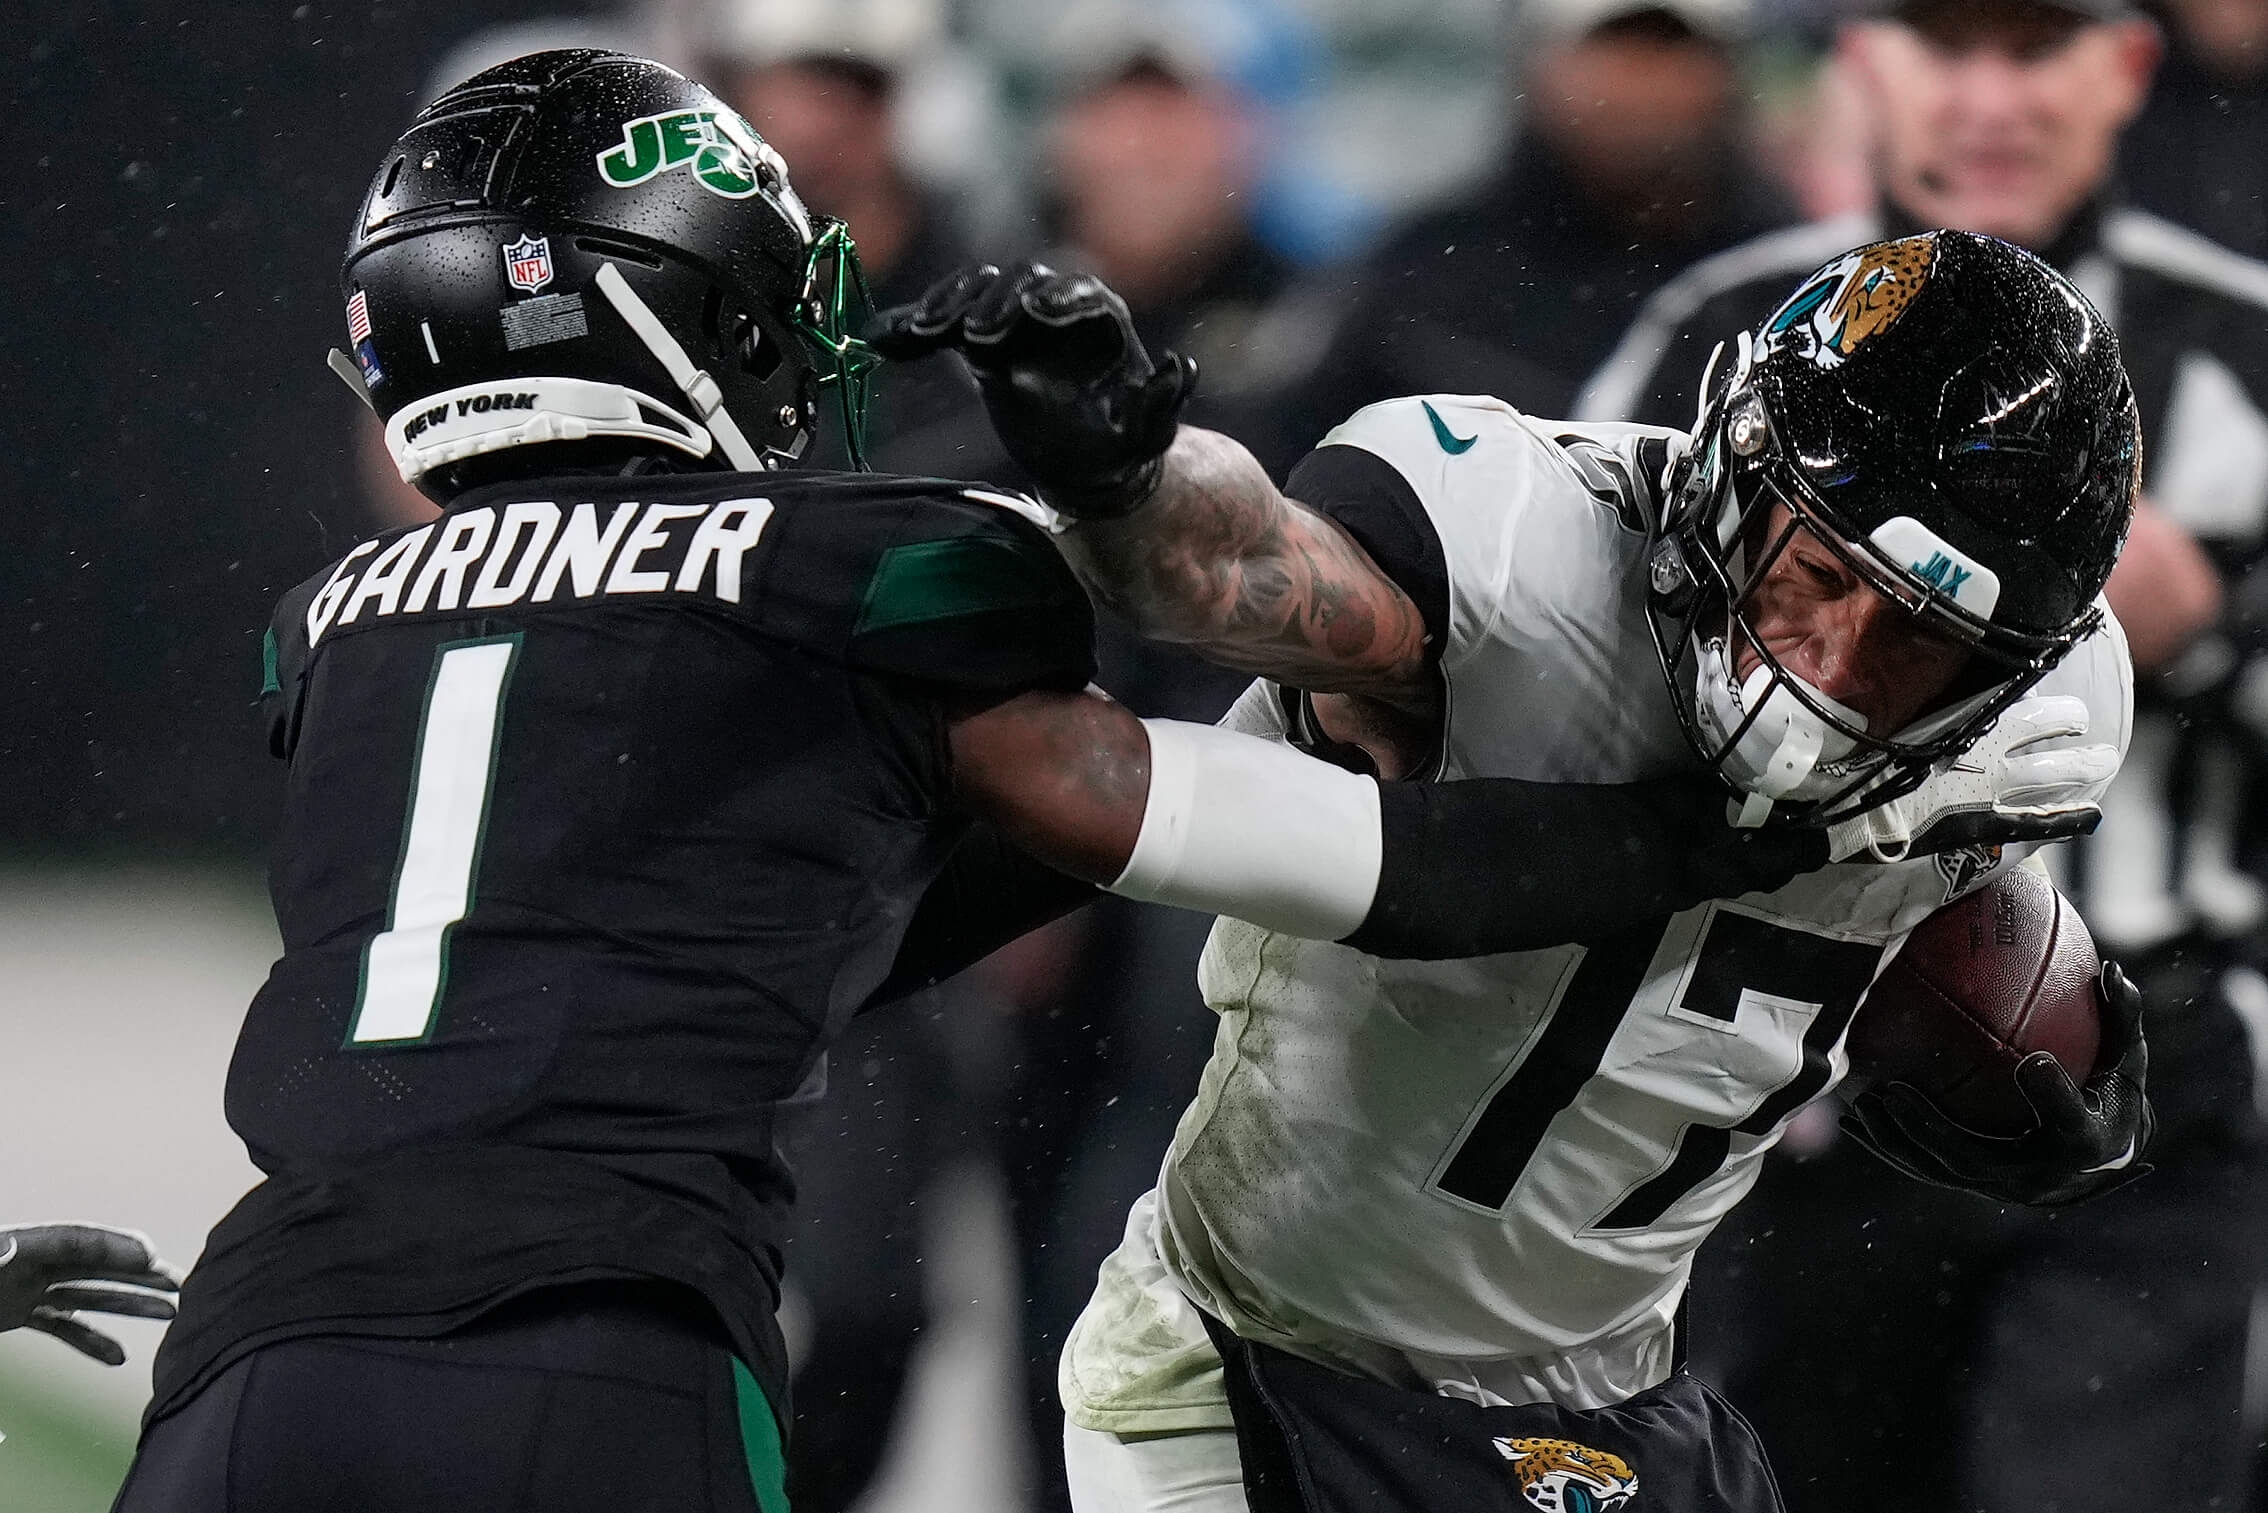 Jets show little fight in home finale loss to Jaguars with playoff hopes  fading fast